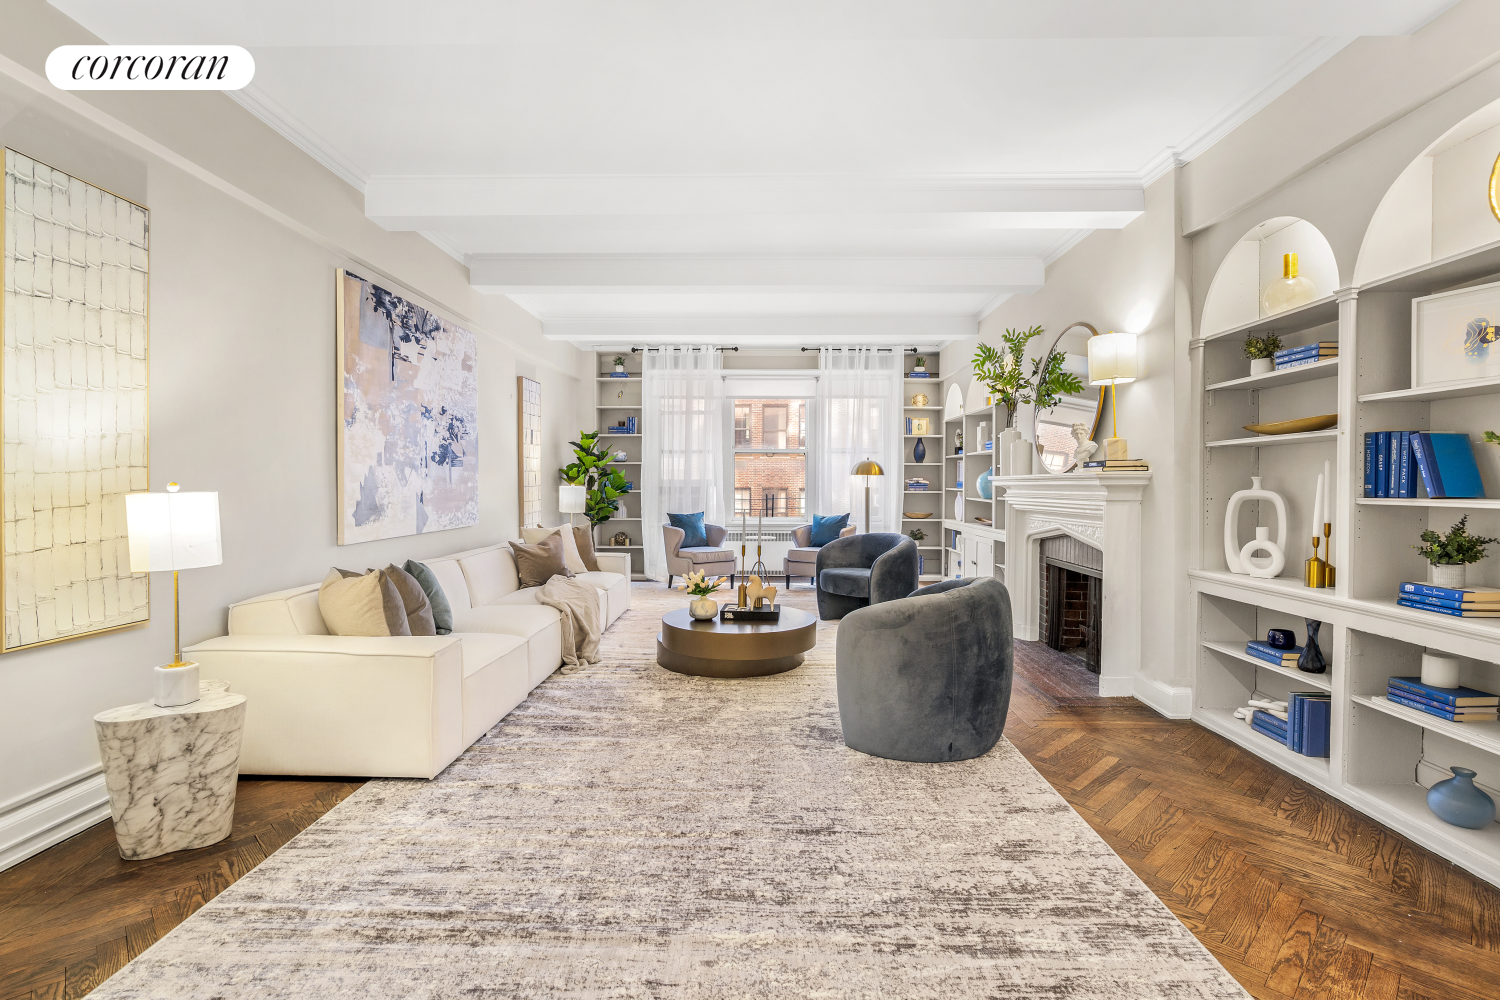 1120 Park Avenue 9Be, Carnegie Hill, Upper East Side, NYC - 3 Bedrooms  
3 Bathrooms  
8 Rooms - 